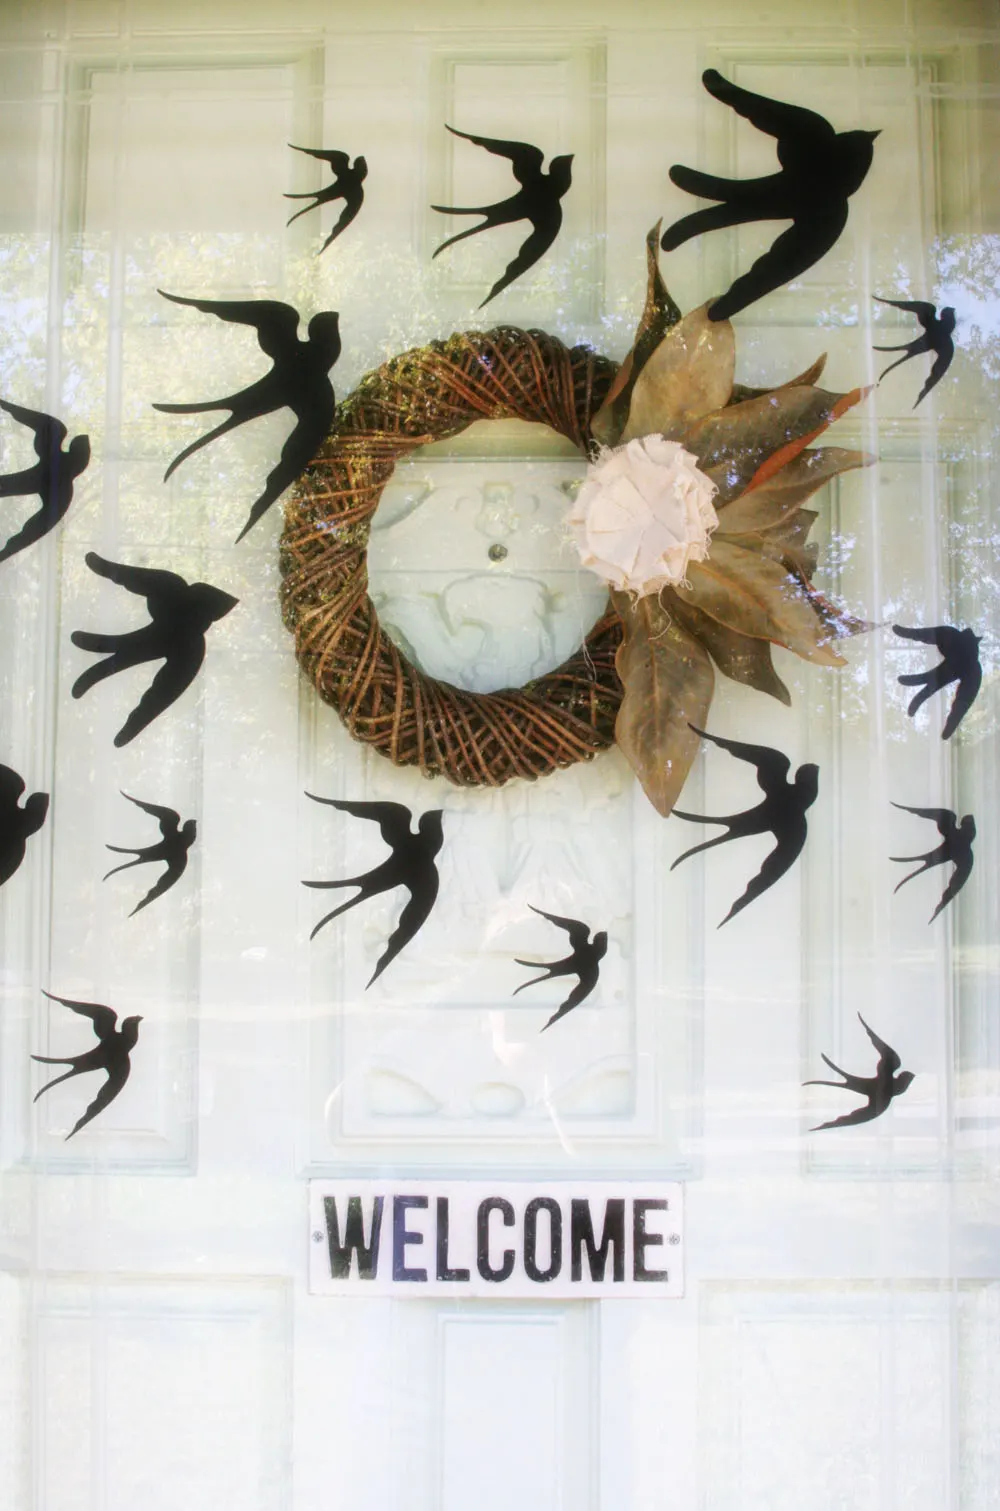 Fall wreath and flying bird adhesives used as DIY outdoor Halloween decorations